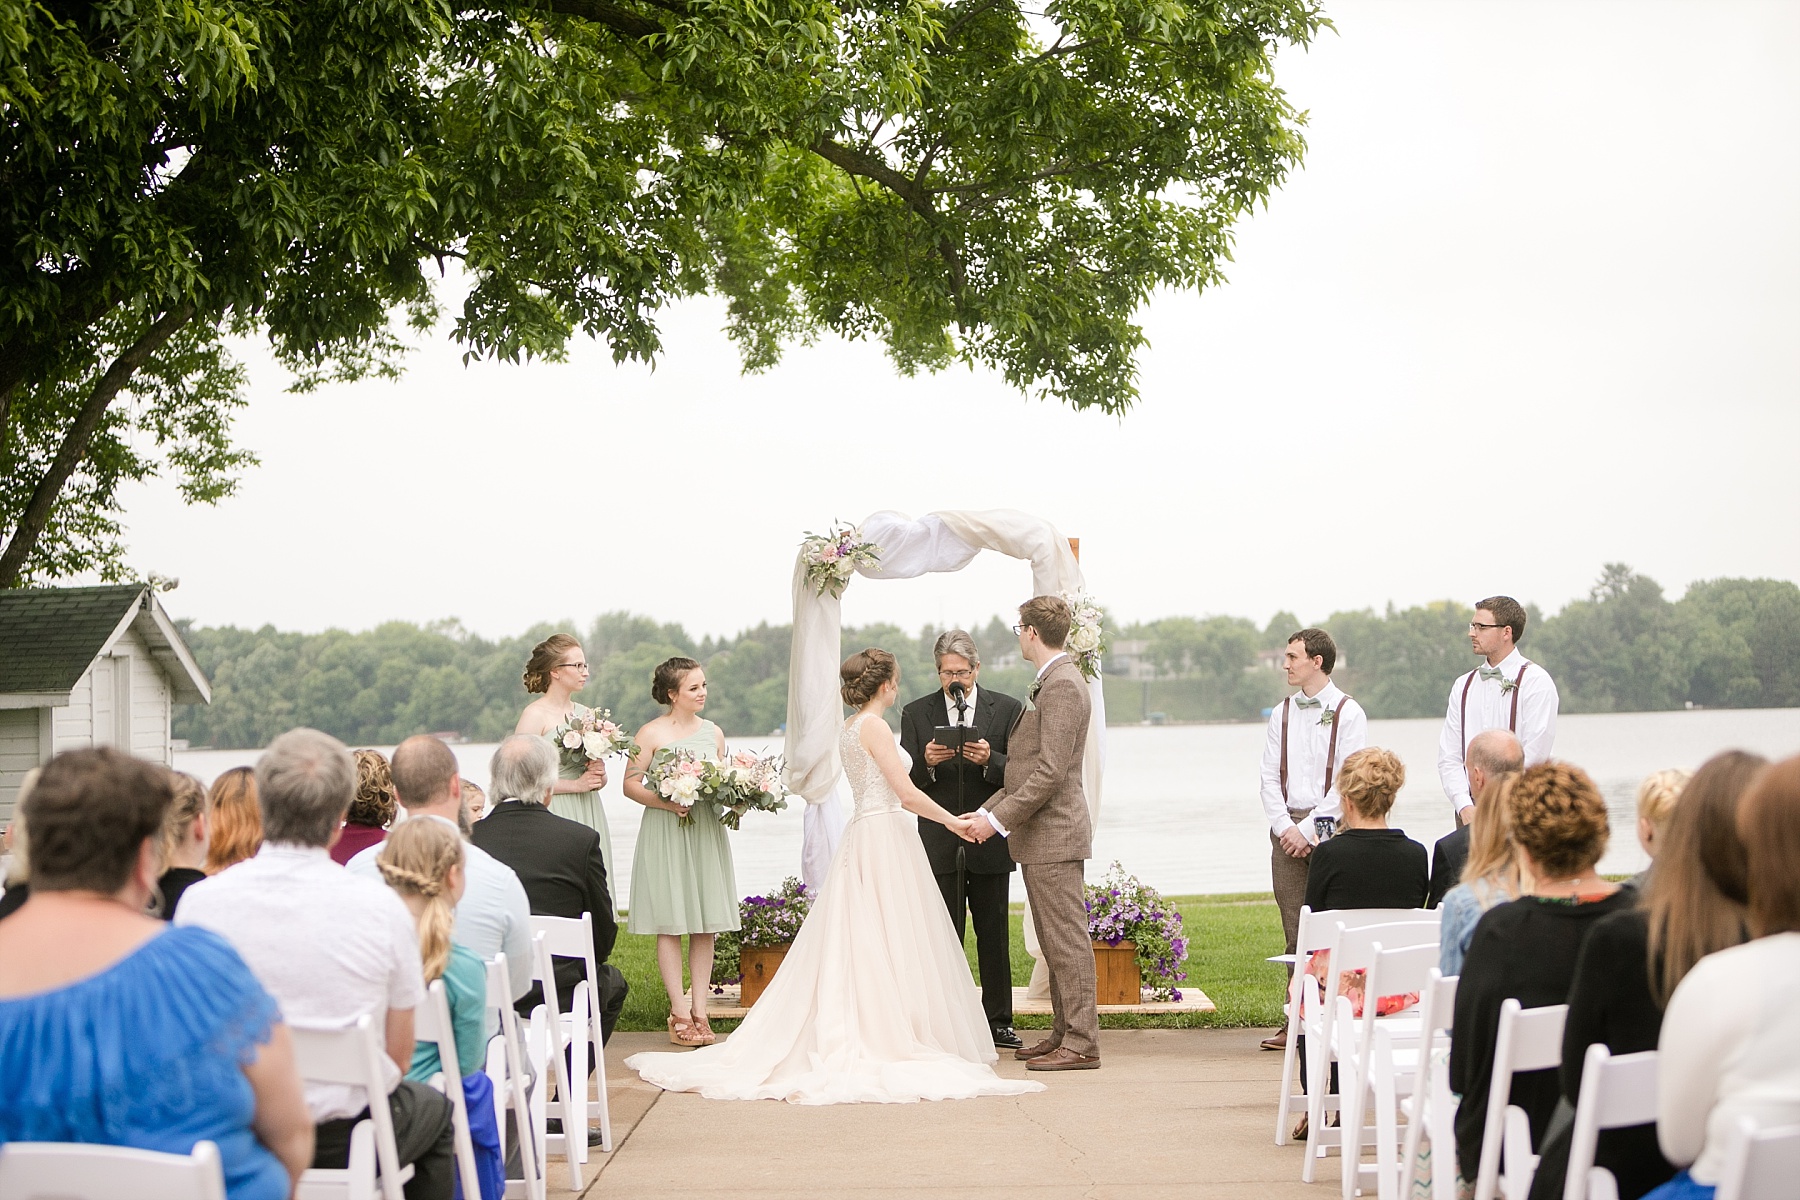 Delicate details and tender moments surrounded Bailey & Jenna for their Lake Wissota Golf wedding.